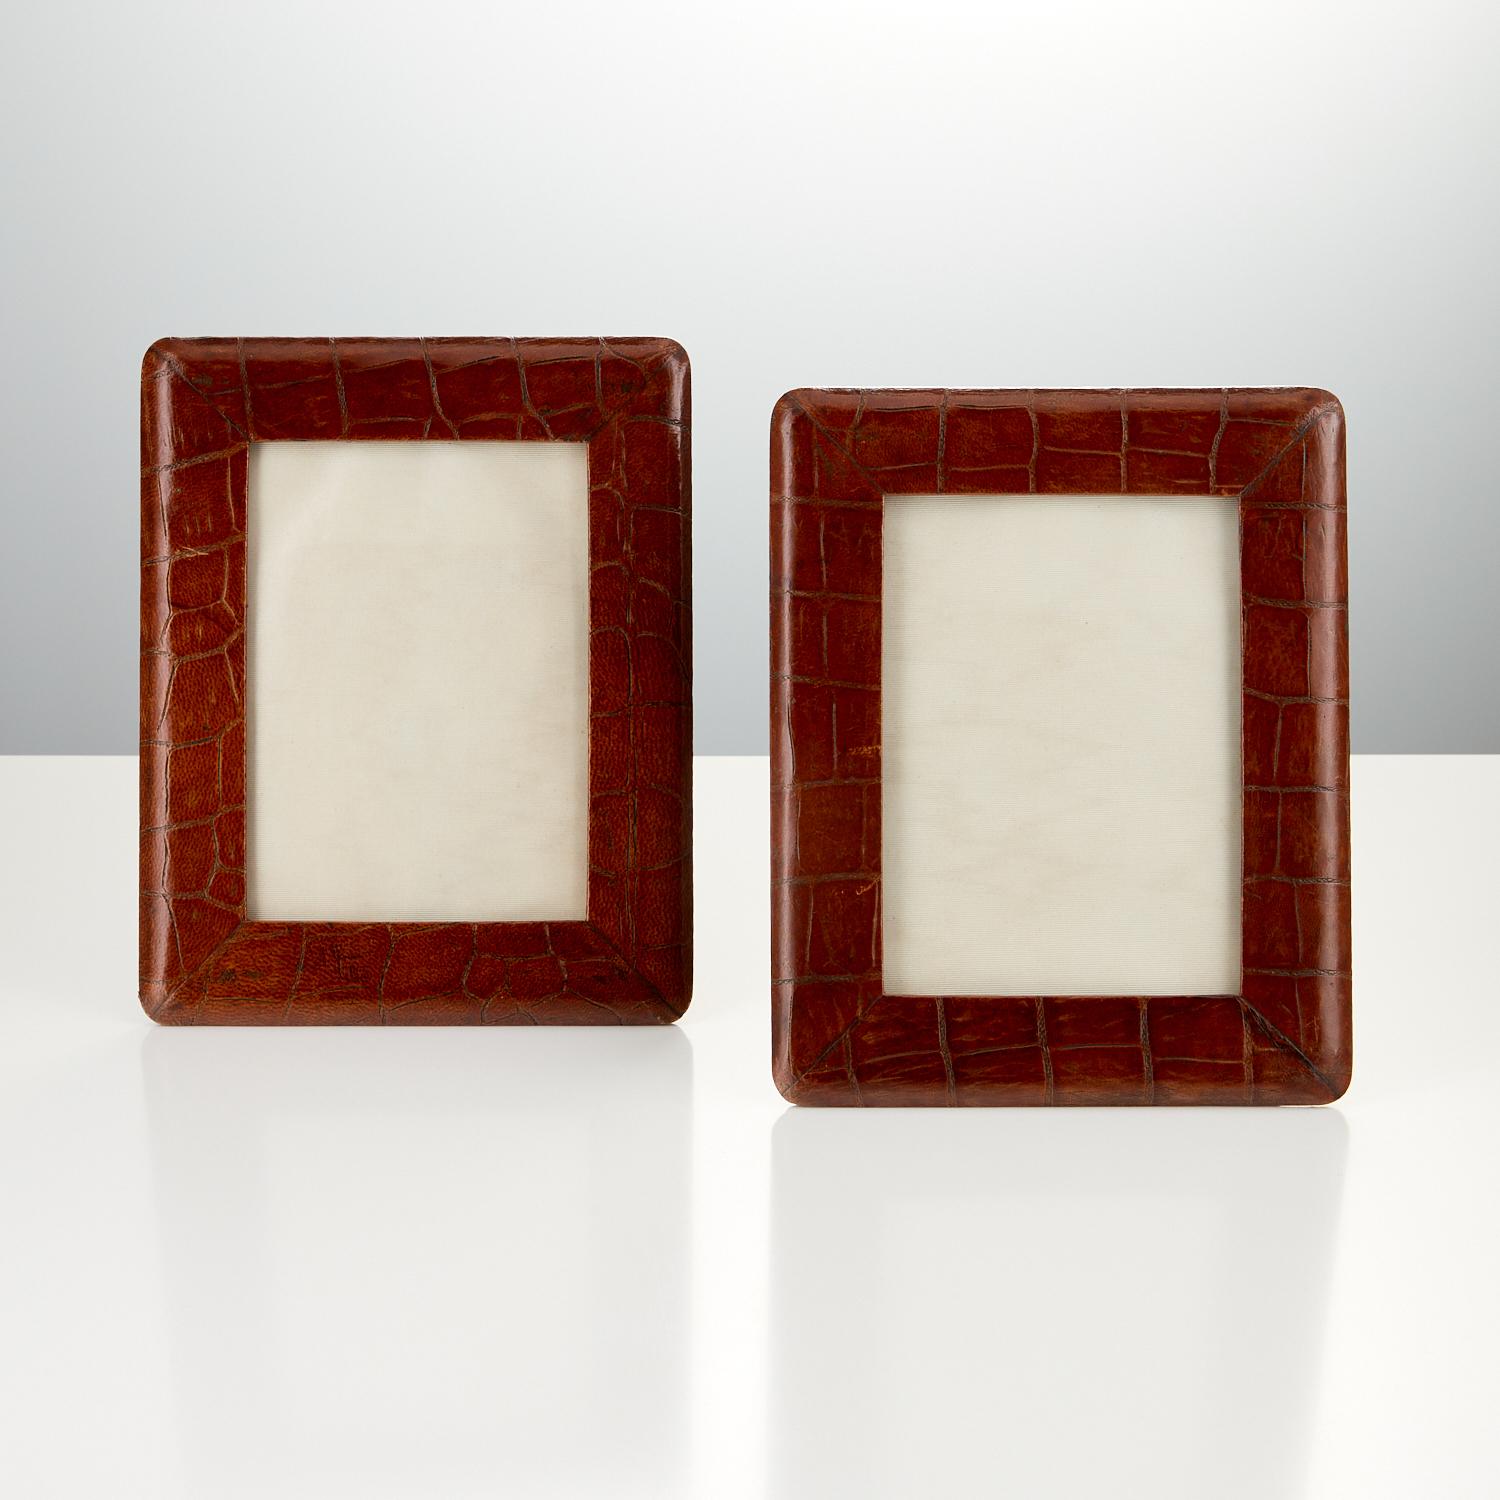 A Pair of Early 20th Century Antique leather photo Frames, Circa 1920.

This pair of Crocodile frames are in very good condition and retain there original patina with just minor use to both frames. The only difference is there is a slight colour